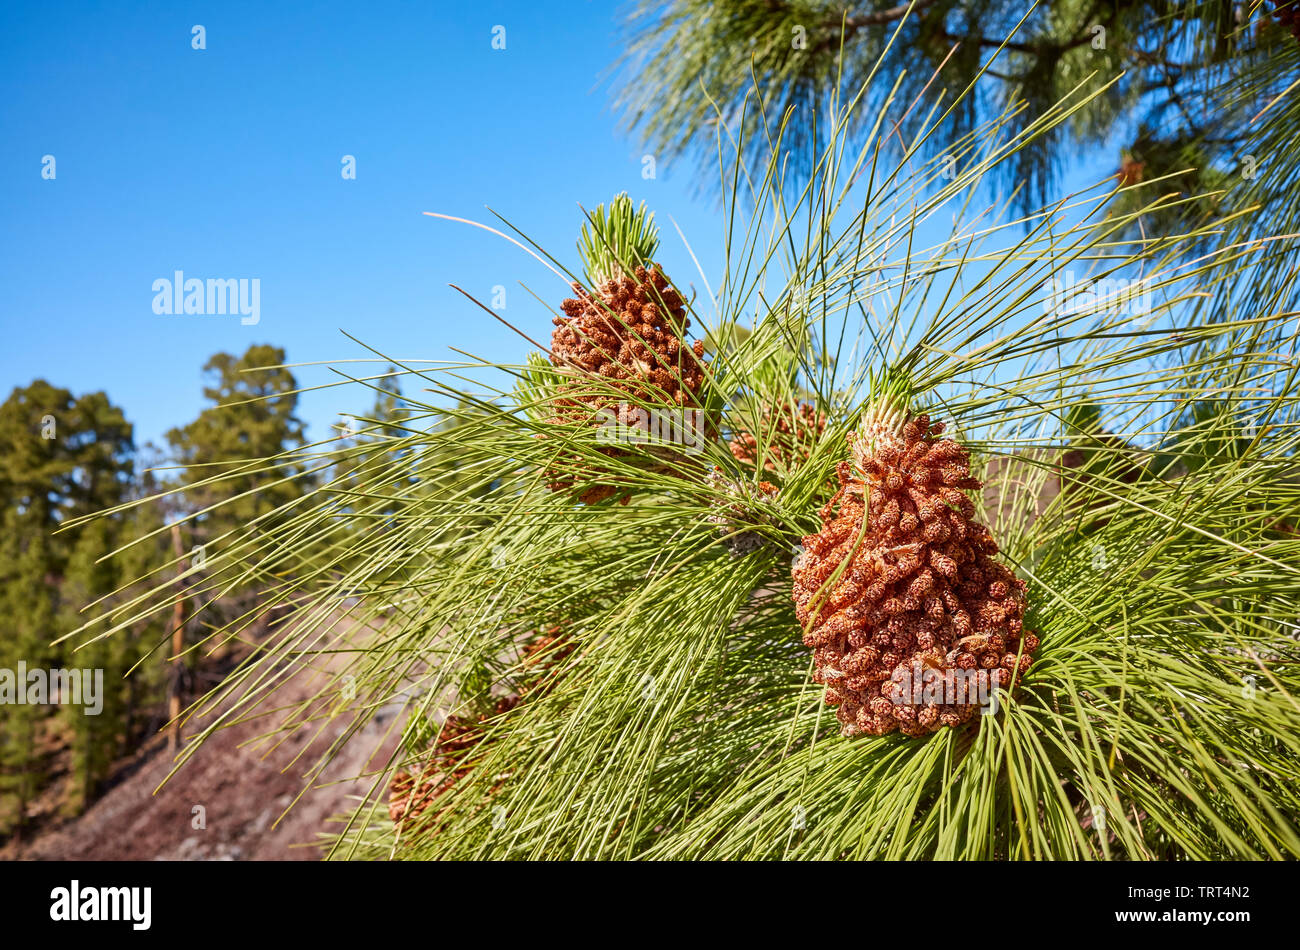 Close up picture of Canary Island pine (Pinus canariensis) in Teide National Park, Tenerife, Spain. Stock Photo